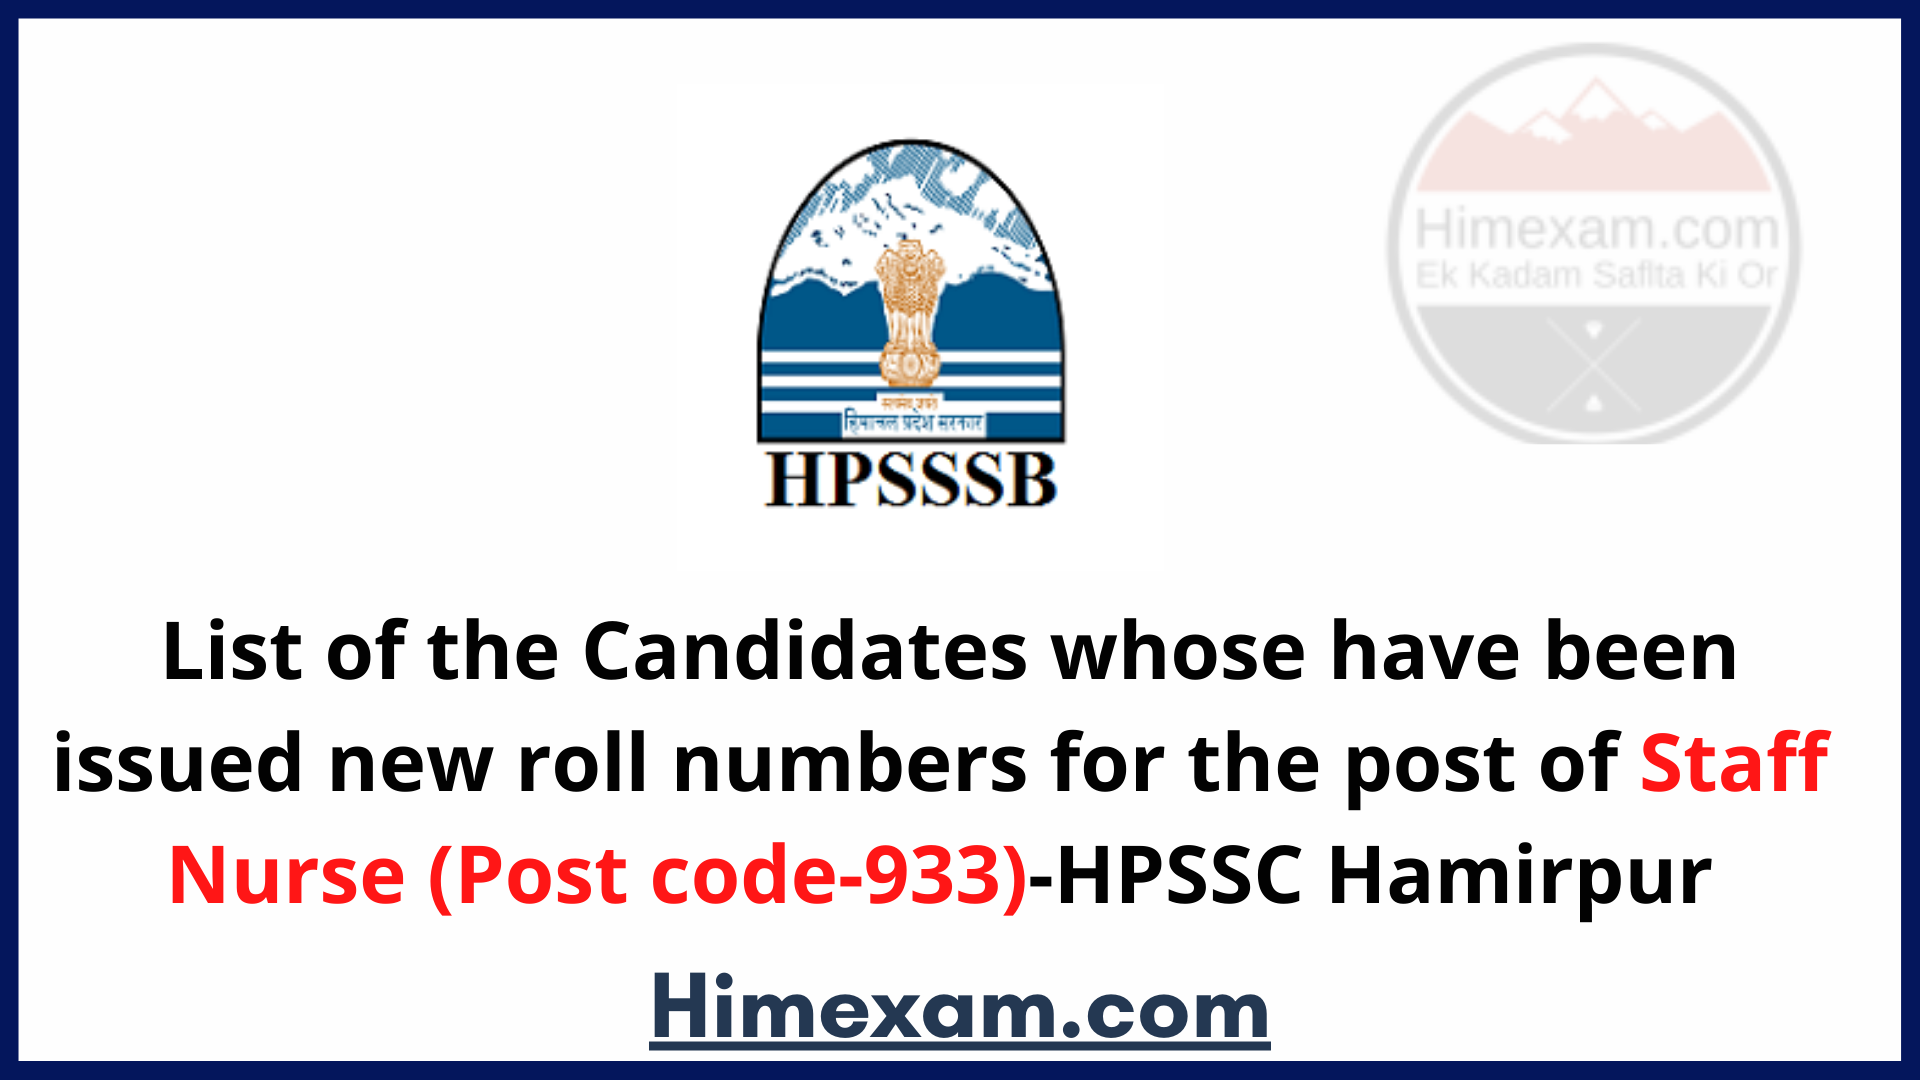 List of the Candidates whose have been issued new roll numbers for the post of Staff Nurse (Post code-933)-HPSSC Hamirpur